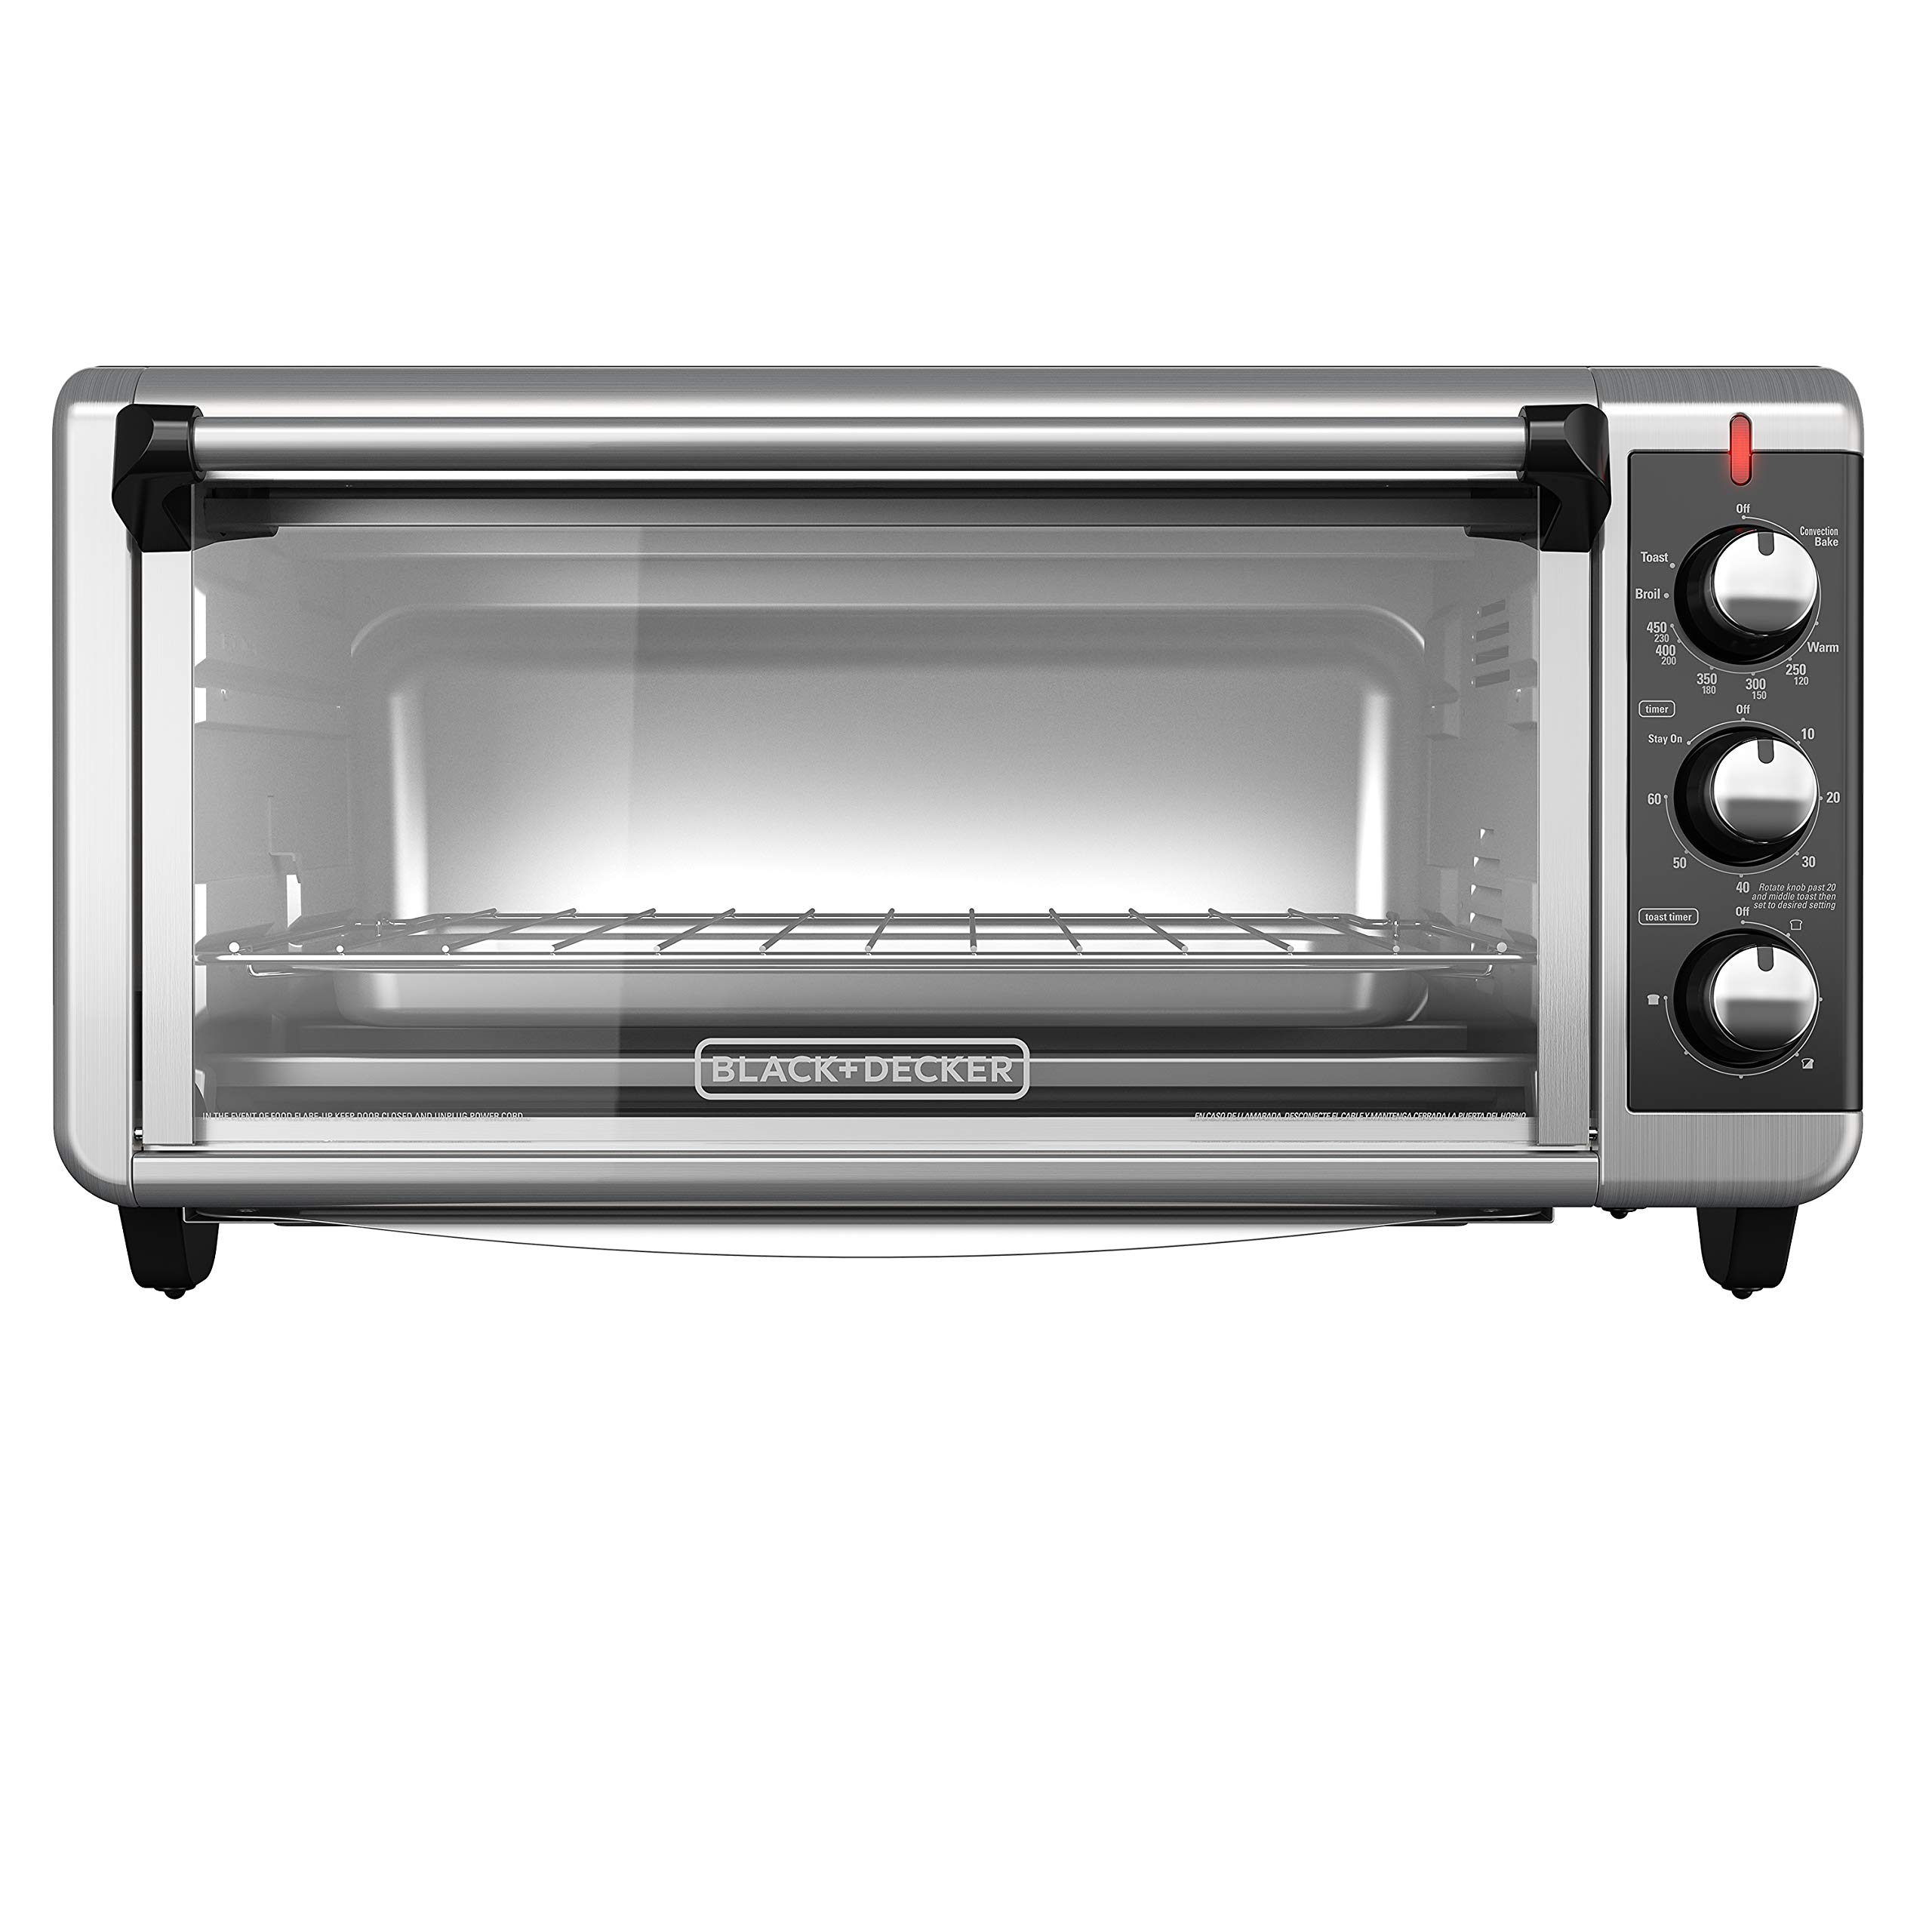 BLACK+DECKER 8-Slice Extra-Wide Stainless Steel/Black Convection Countertop Toaster and Pizza Oven with Broiler Pan